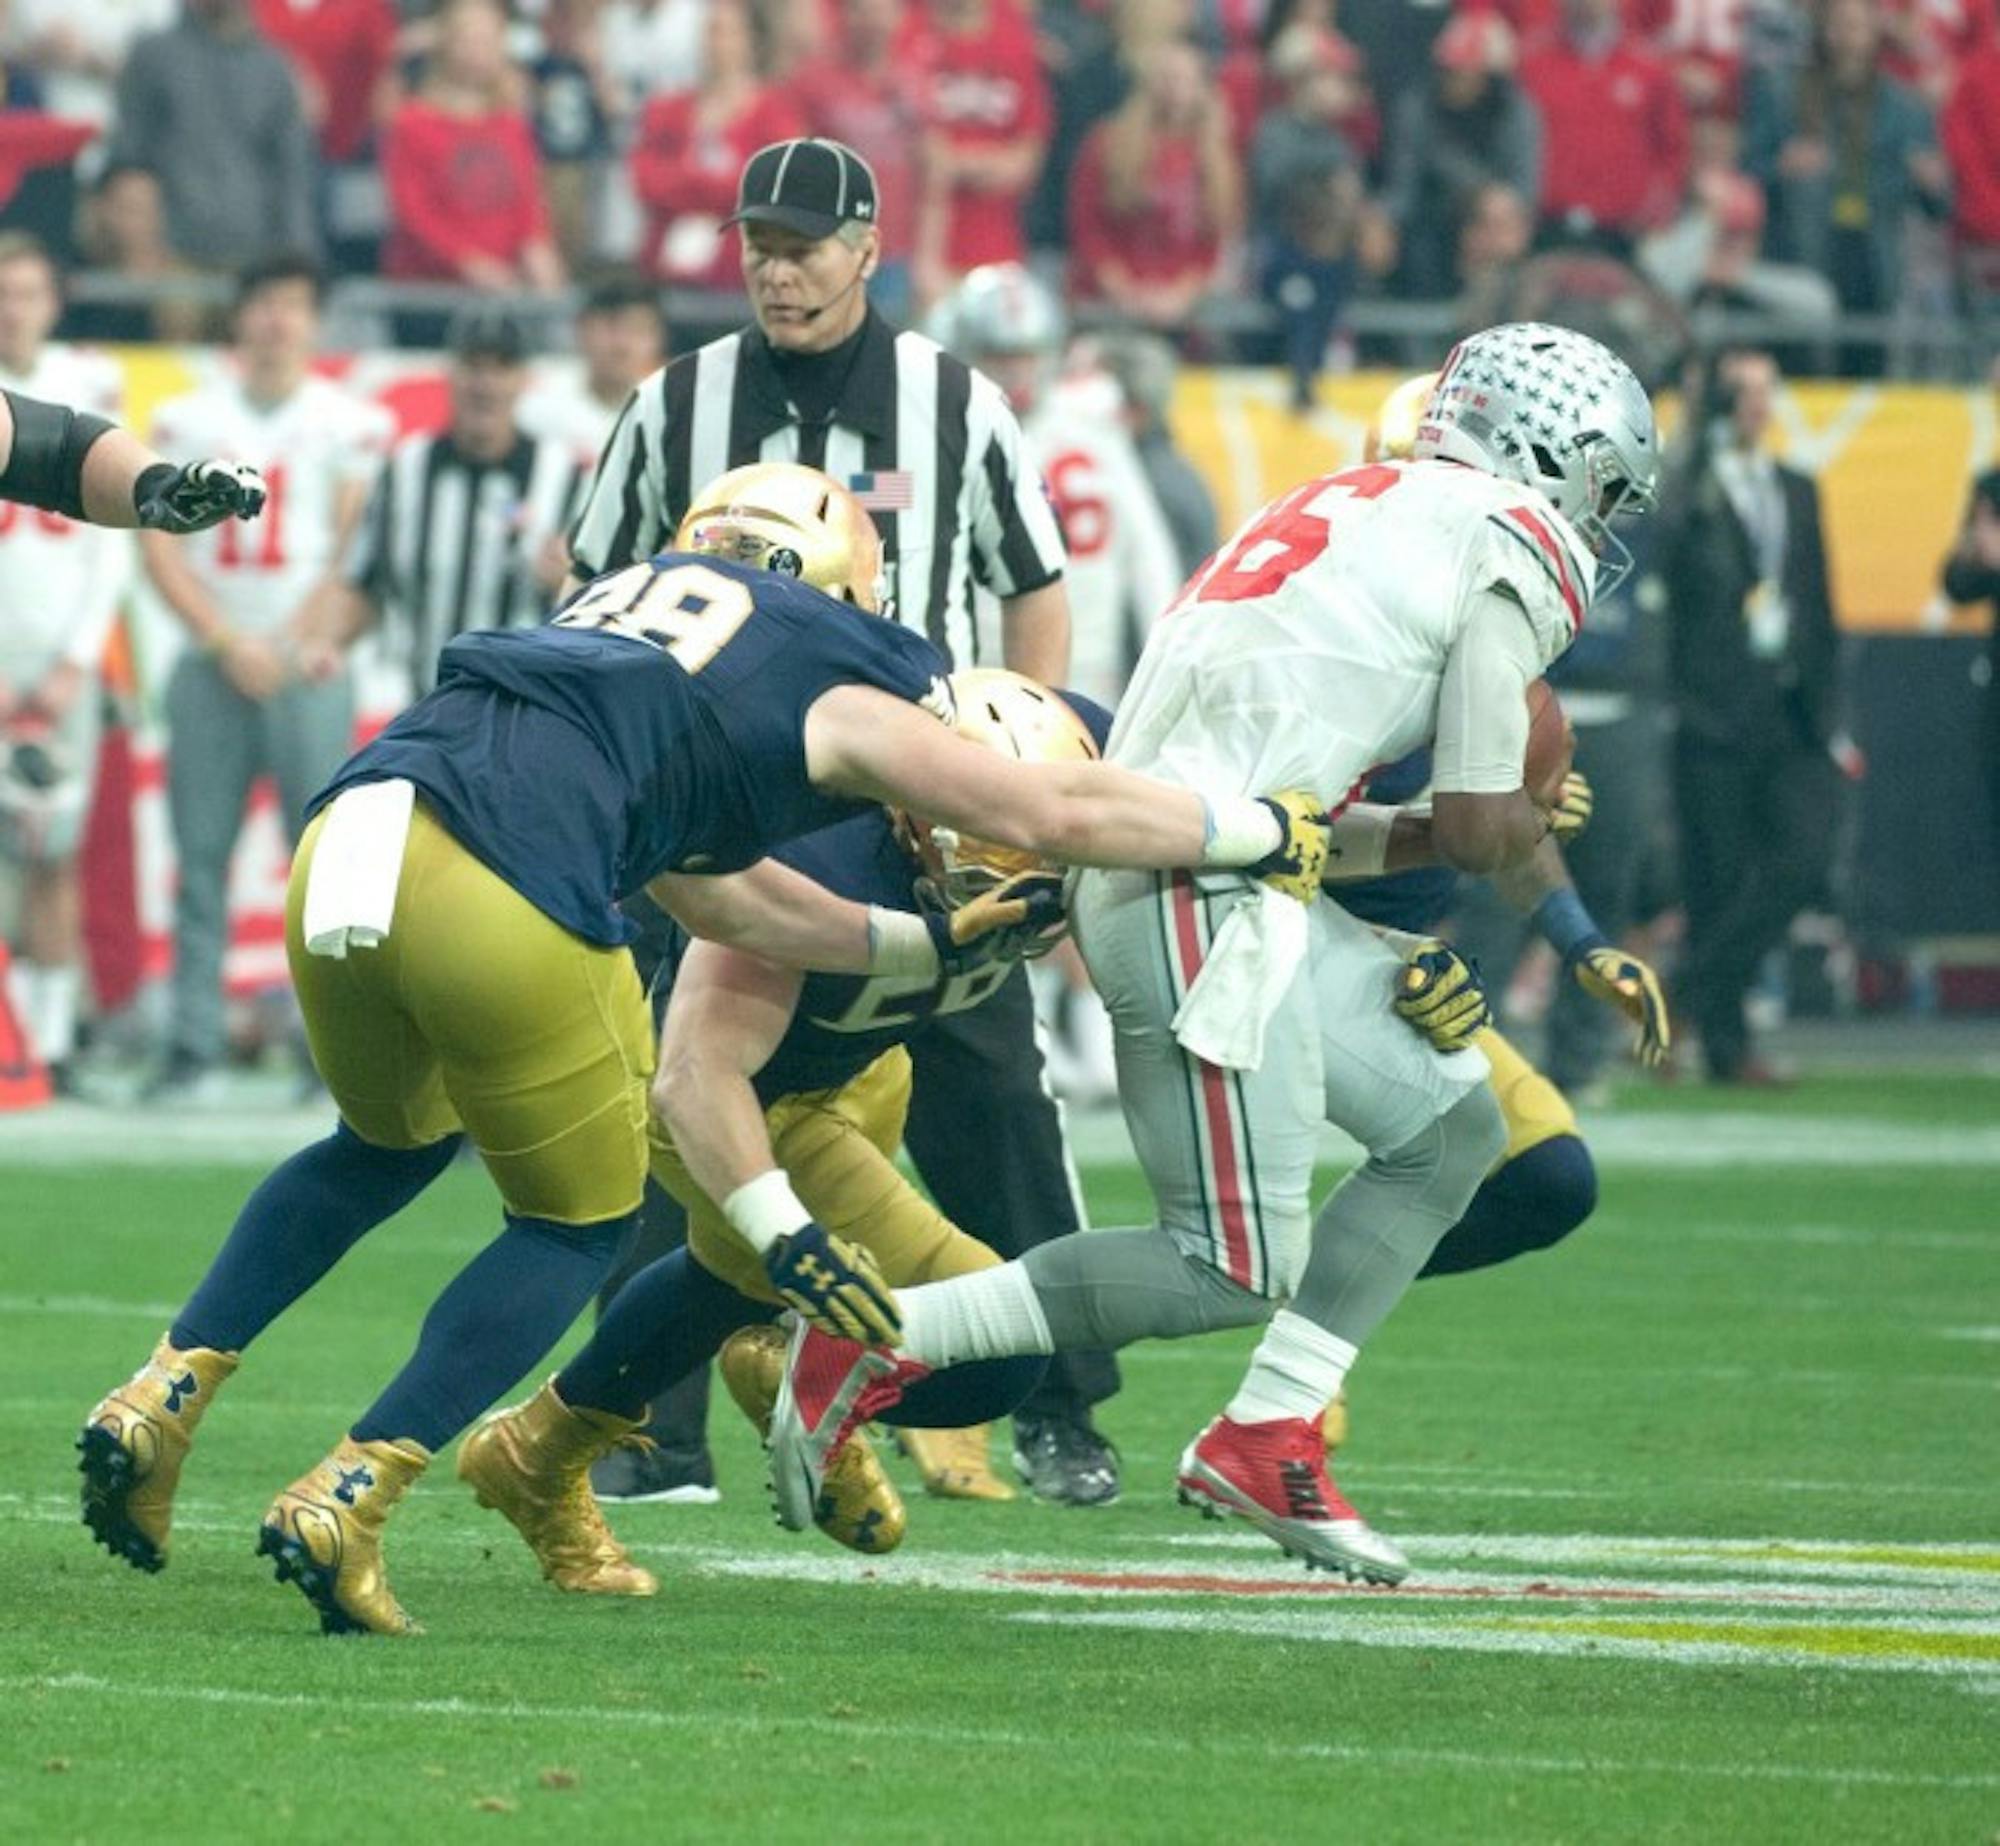 Irish sophomore defensive lineman Andrew Trumbetti tackles Ohio State sophomore quarterback J.T. Barrett during Notre Dame's 44-28 loss to the Buckeyes on Friday in the Fiesta Bowl in Glendale, Arizona.